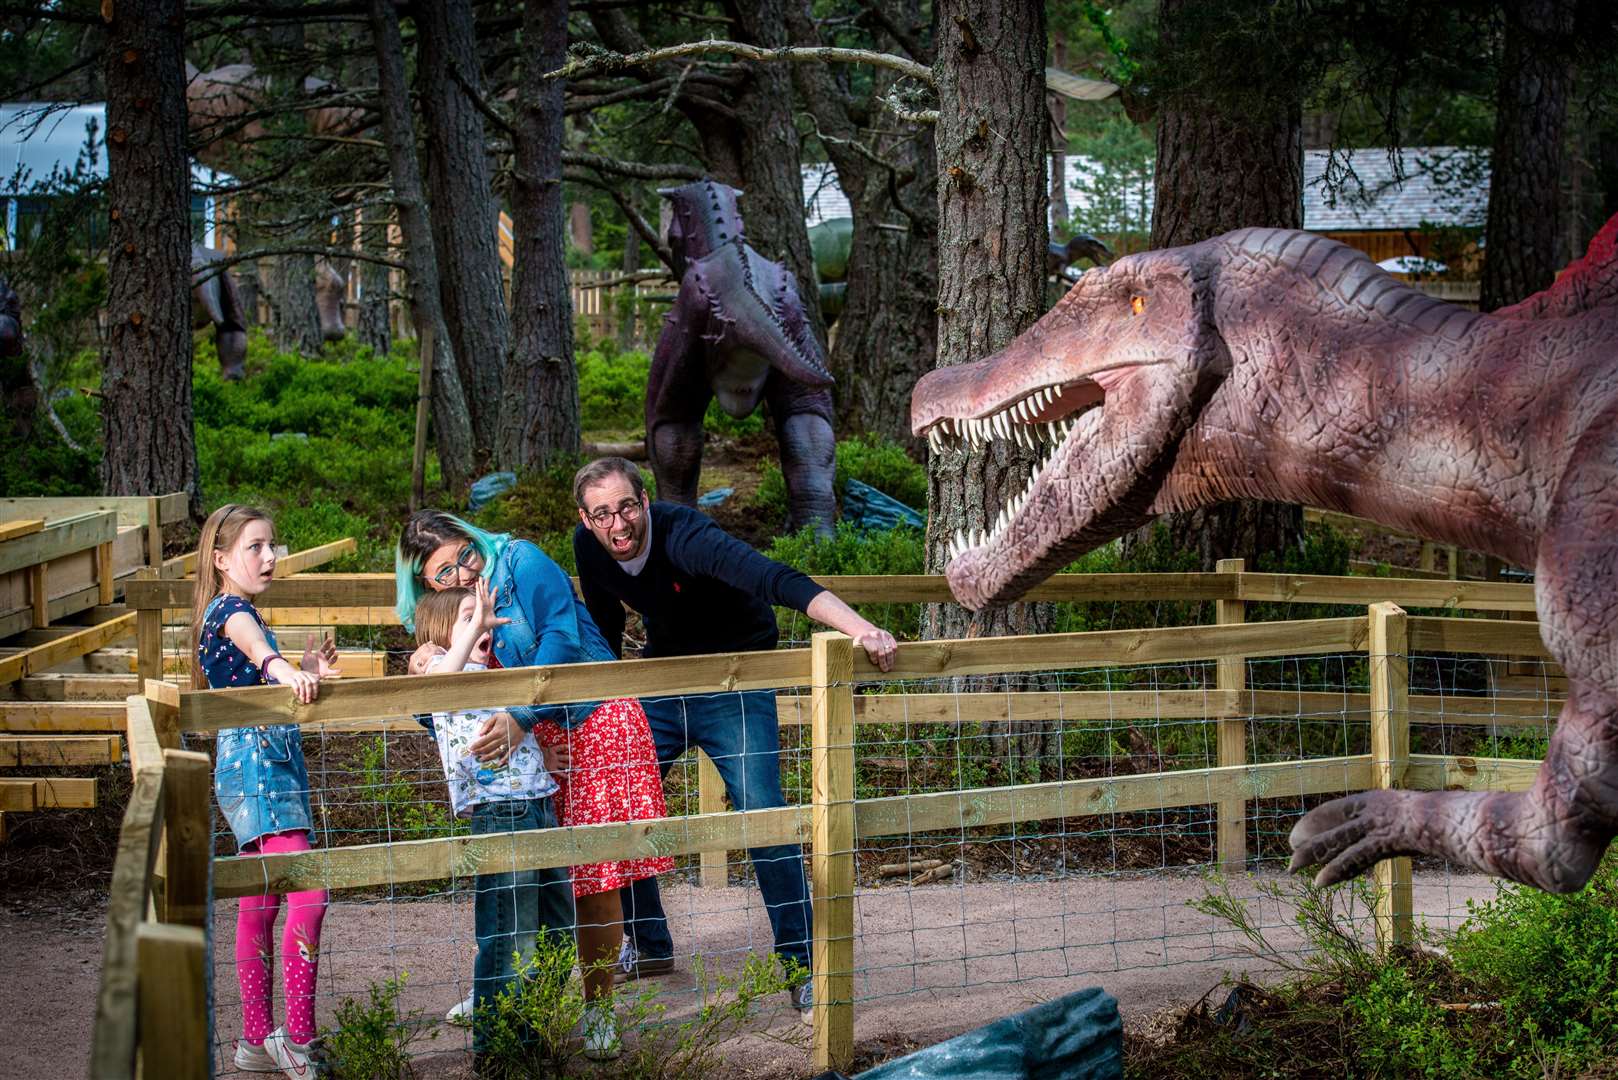 All the family is guaranteed to enjoy some roaring fun at Dinosaur Kingdom at the Landmark Forest Adventure Park at Carrbridge.